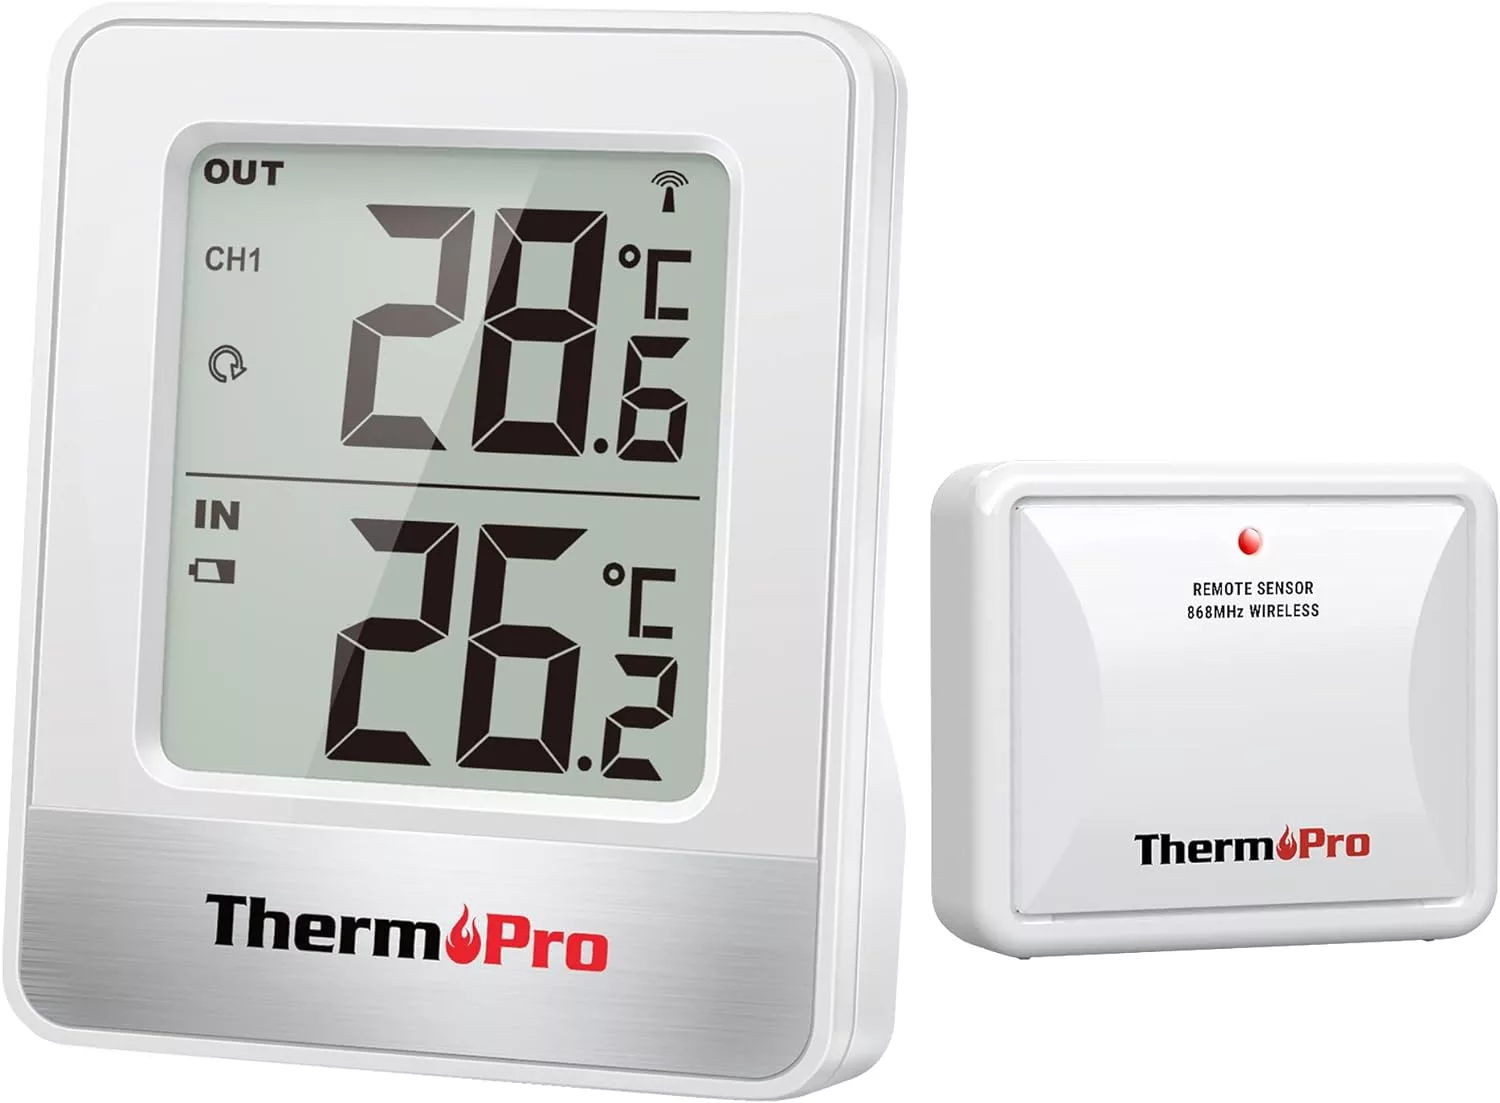 ThermoPro Hygrometer Indoor Thermometer for Home (iOS & Android